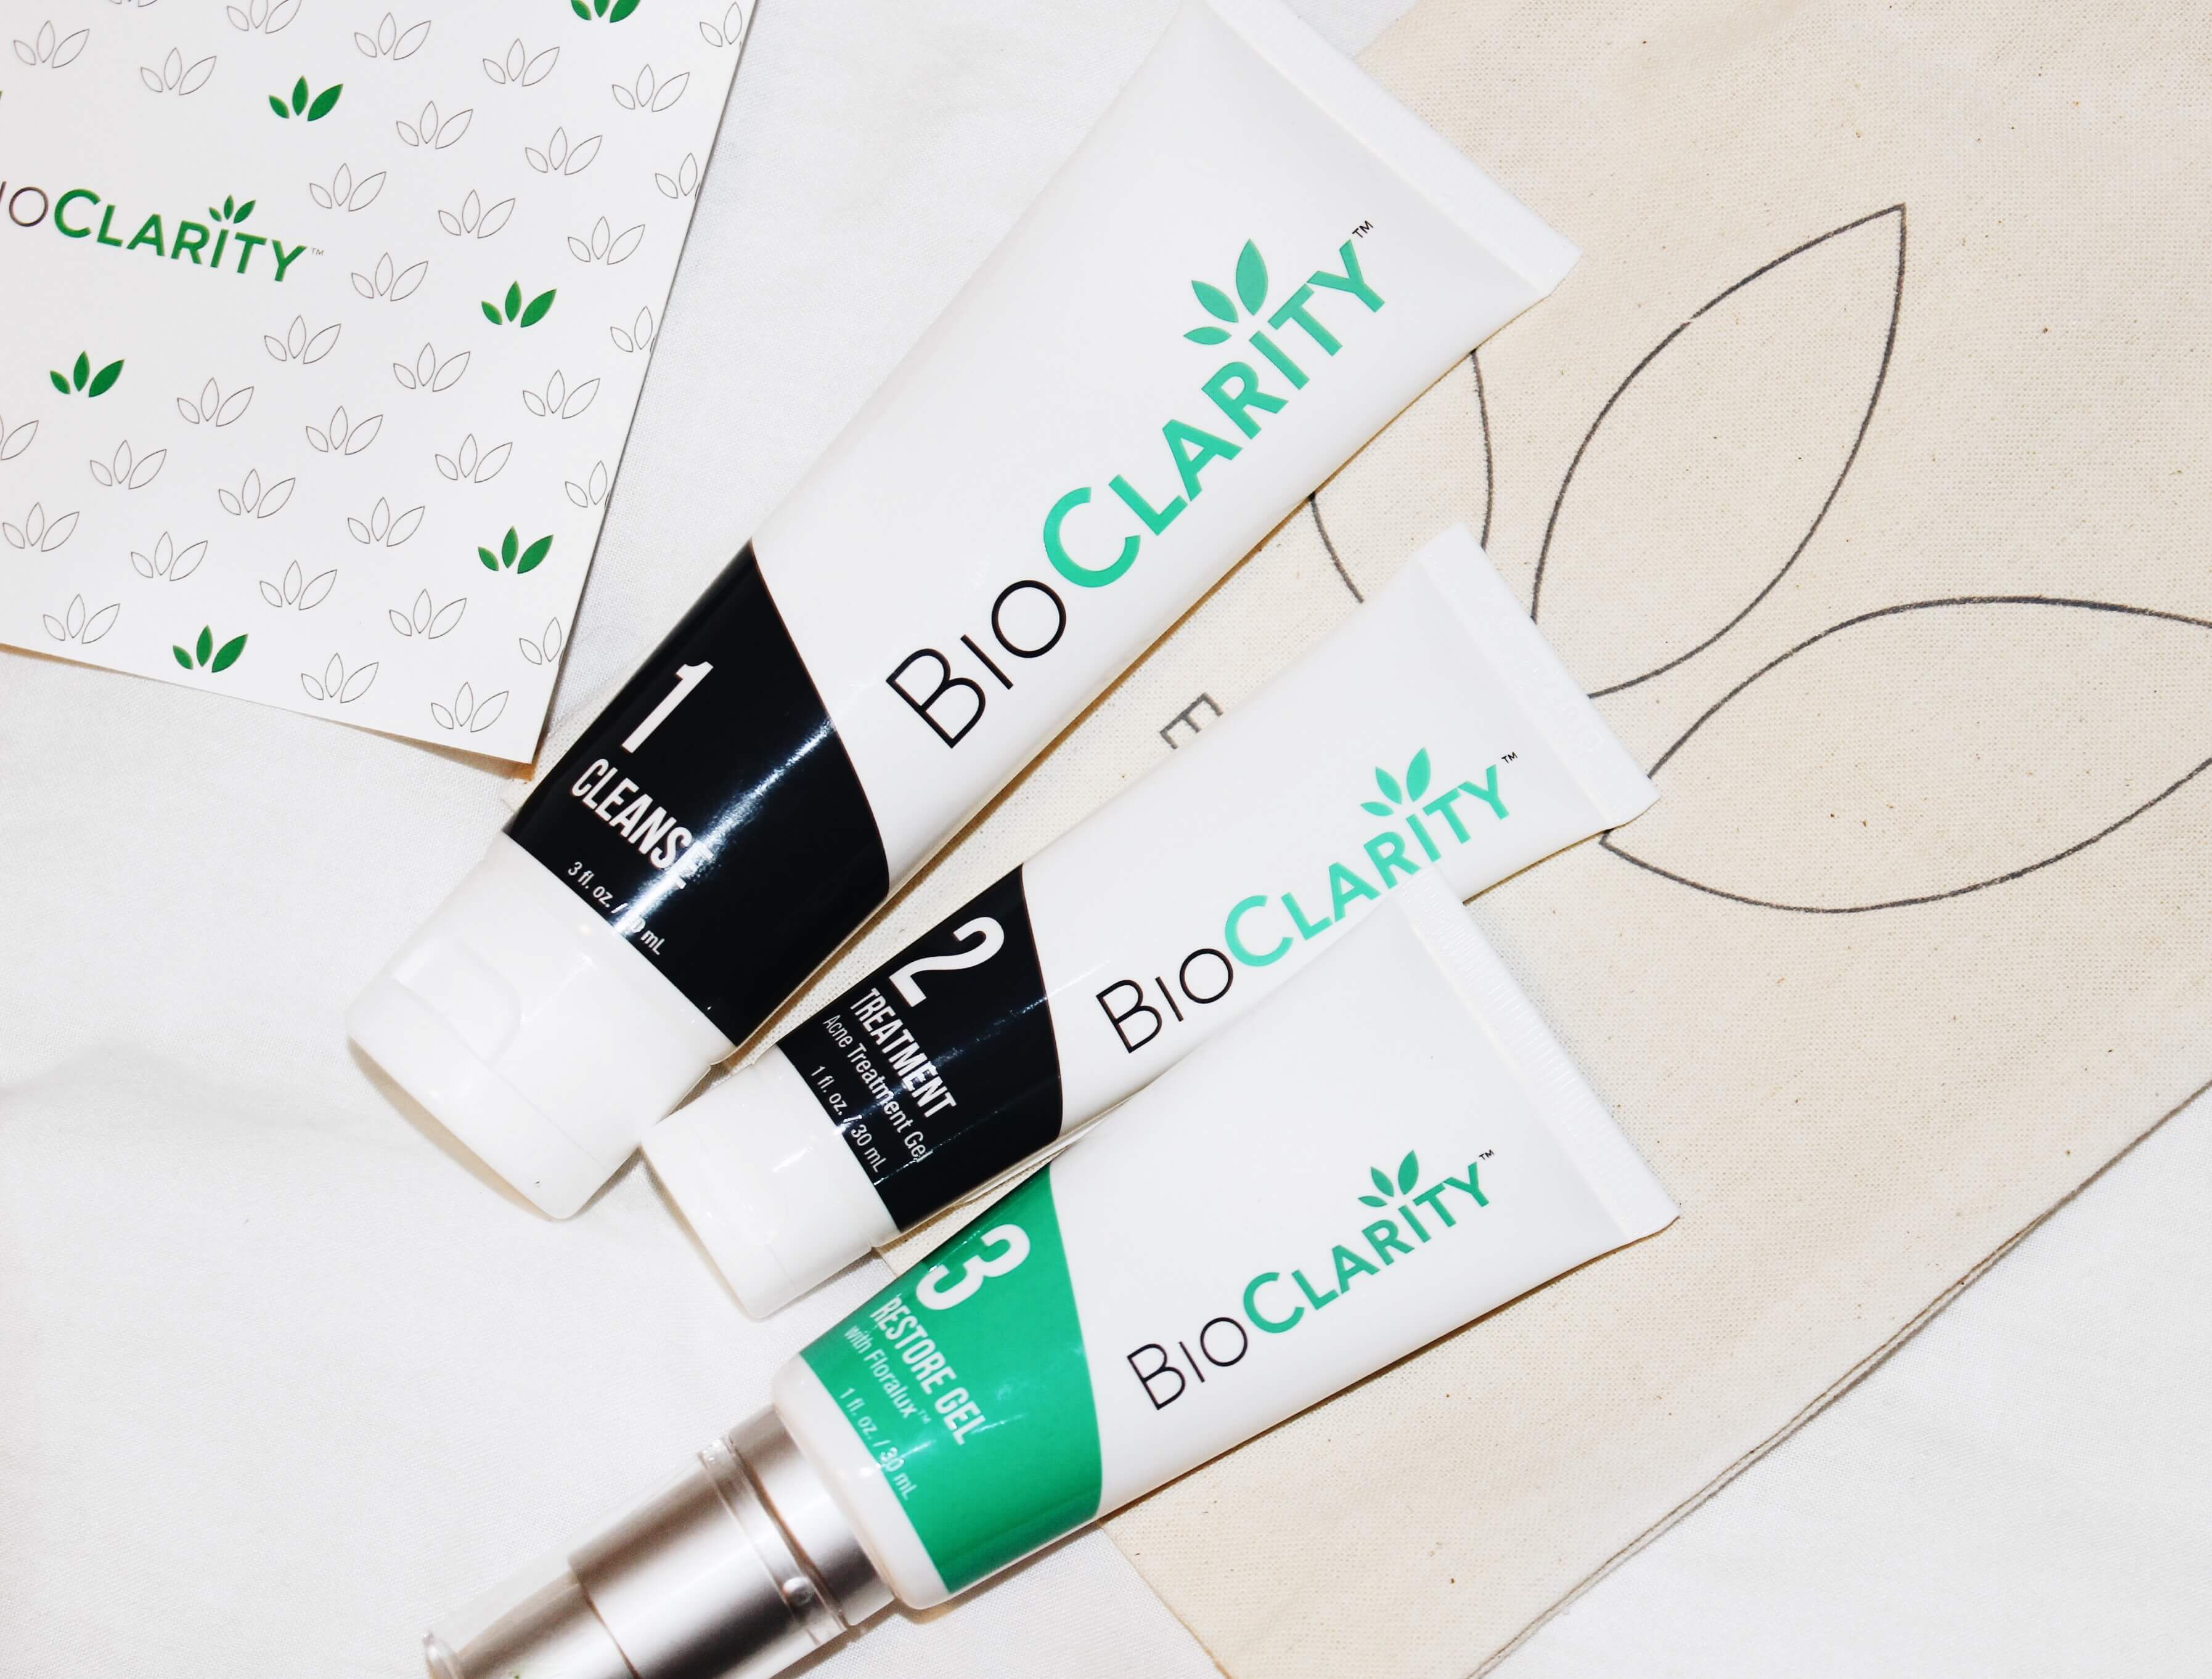 Read Emma's BioClarity review of the naturally-derived 3-step skincare system.